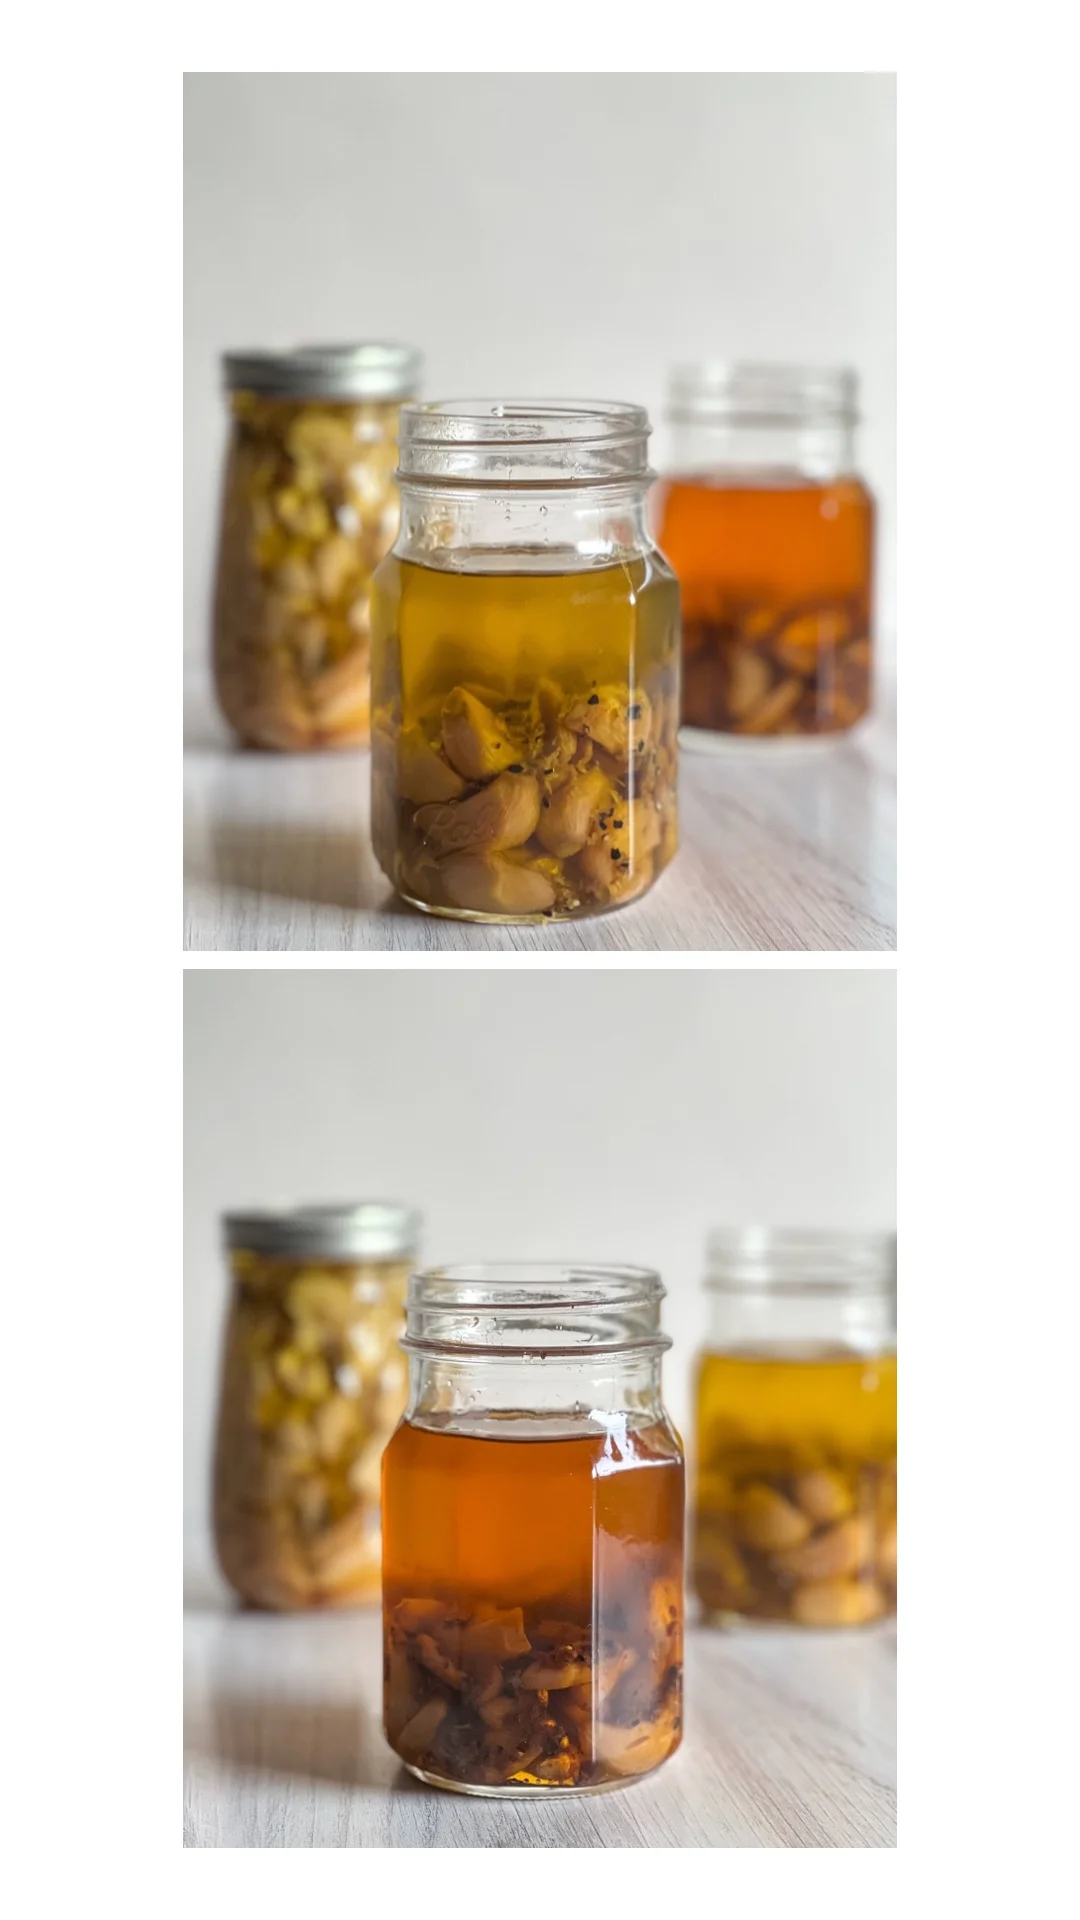 Infused olive oil with garlic and spices